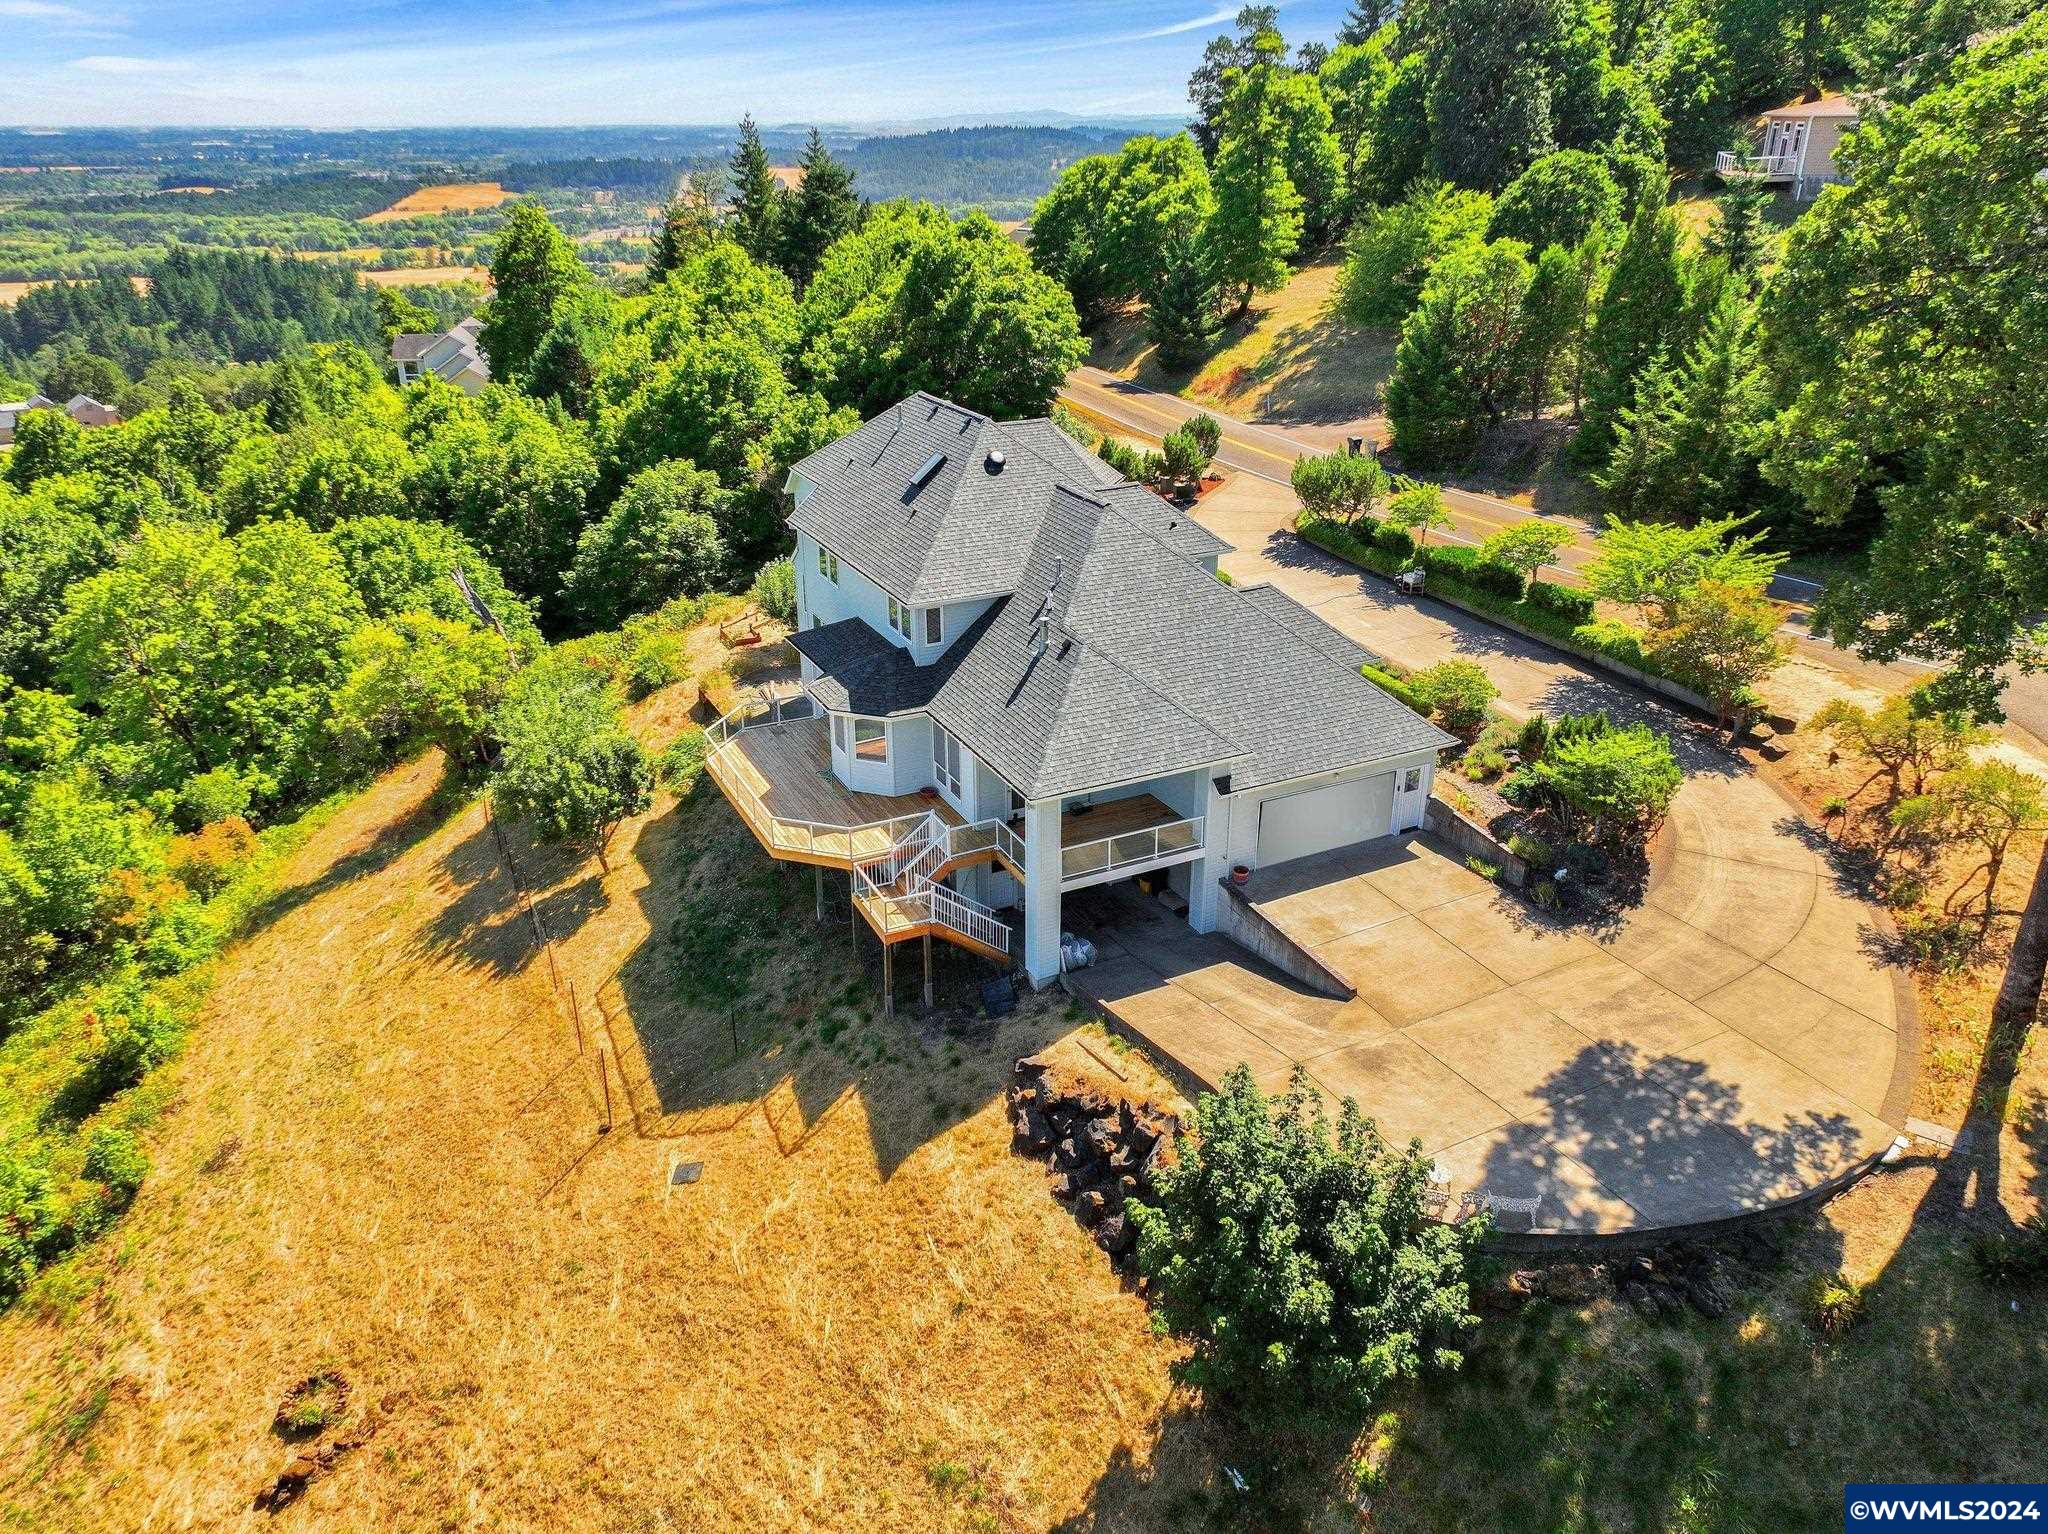 Perched atop the hill, this custom home by Russ Peterson offers breathtaking vistas from Mt. Hood to Three Sisters! Situated on 4.8 acres zoned RR-3, with the potential for a second lot, it's conveniently close to town. Inside, you'll find a formal living and dining area with a cozy gas fireplace, a spacious kitchen featuring granite countertops, a breakfast nook, stainless steel appliances, and a walk-in pantry. Work comfortably in the office, equipped with custom built-in shelves. The family room boasts another fireplace and opens onto a newly finished deck, perfect for soaking in the panoramic views. Retreat to the primary suite with its coffered ceilings and a luxurious tiled shower offering stunning vistas. Three additional bedrooms and an updated bathroom with a skylight complete the upper level. Downstairs, discover a wine cellar and a one-bedroom suite with a sliding door leading to a patio. The front landscaping is impeccably maintained and plumbed for an underground sprinkler system. Enjoy year-round comfort with 2-zone gas forced air heating and air conditioning. The oversized three-car garage includes a workshop and a potting area. Recent updates include a newer roof, kitchen renovations, fresh paint, deck enhancements, and more.